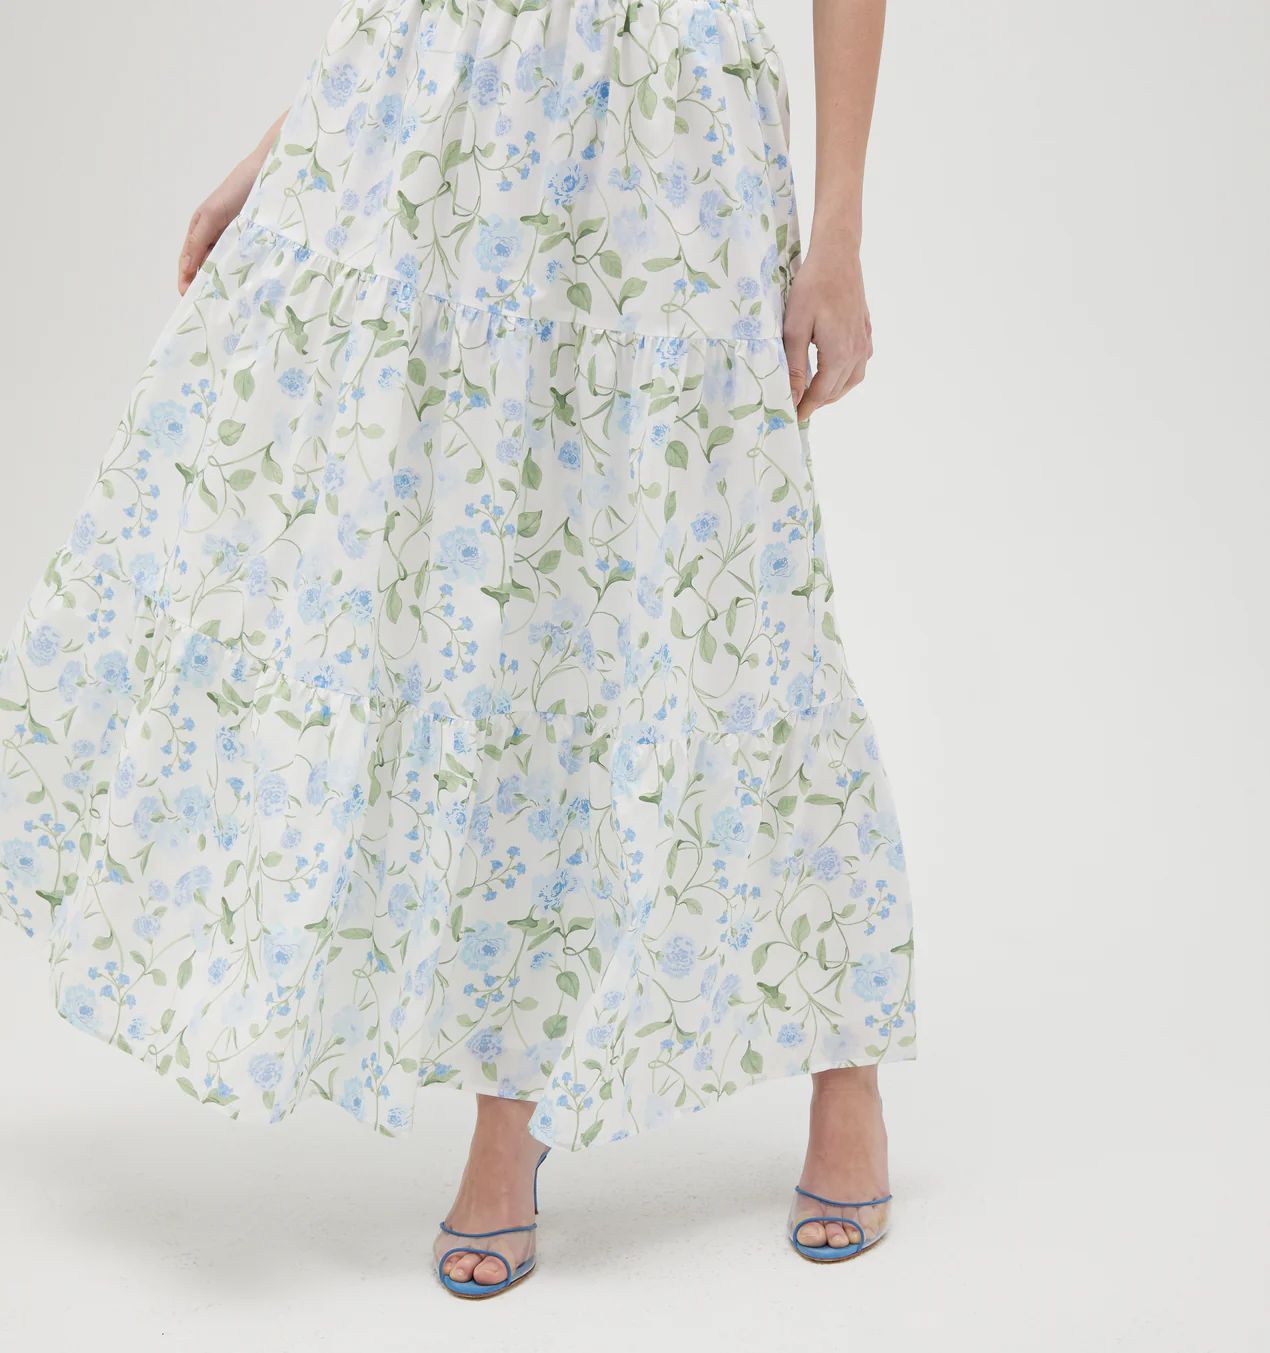 The Florence Nap Skirt - Blue Peony Bouquet Cotton | Hill House Home